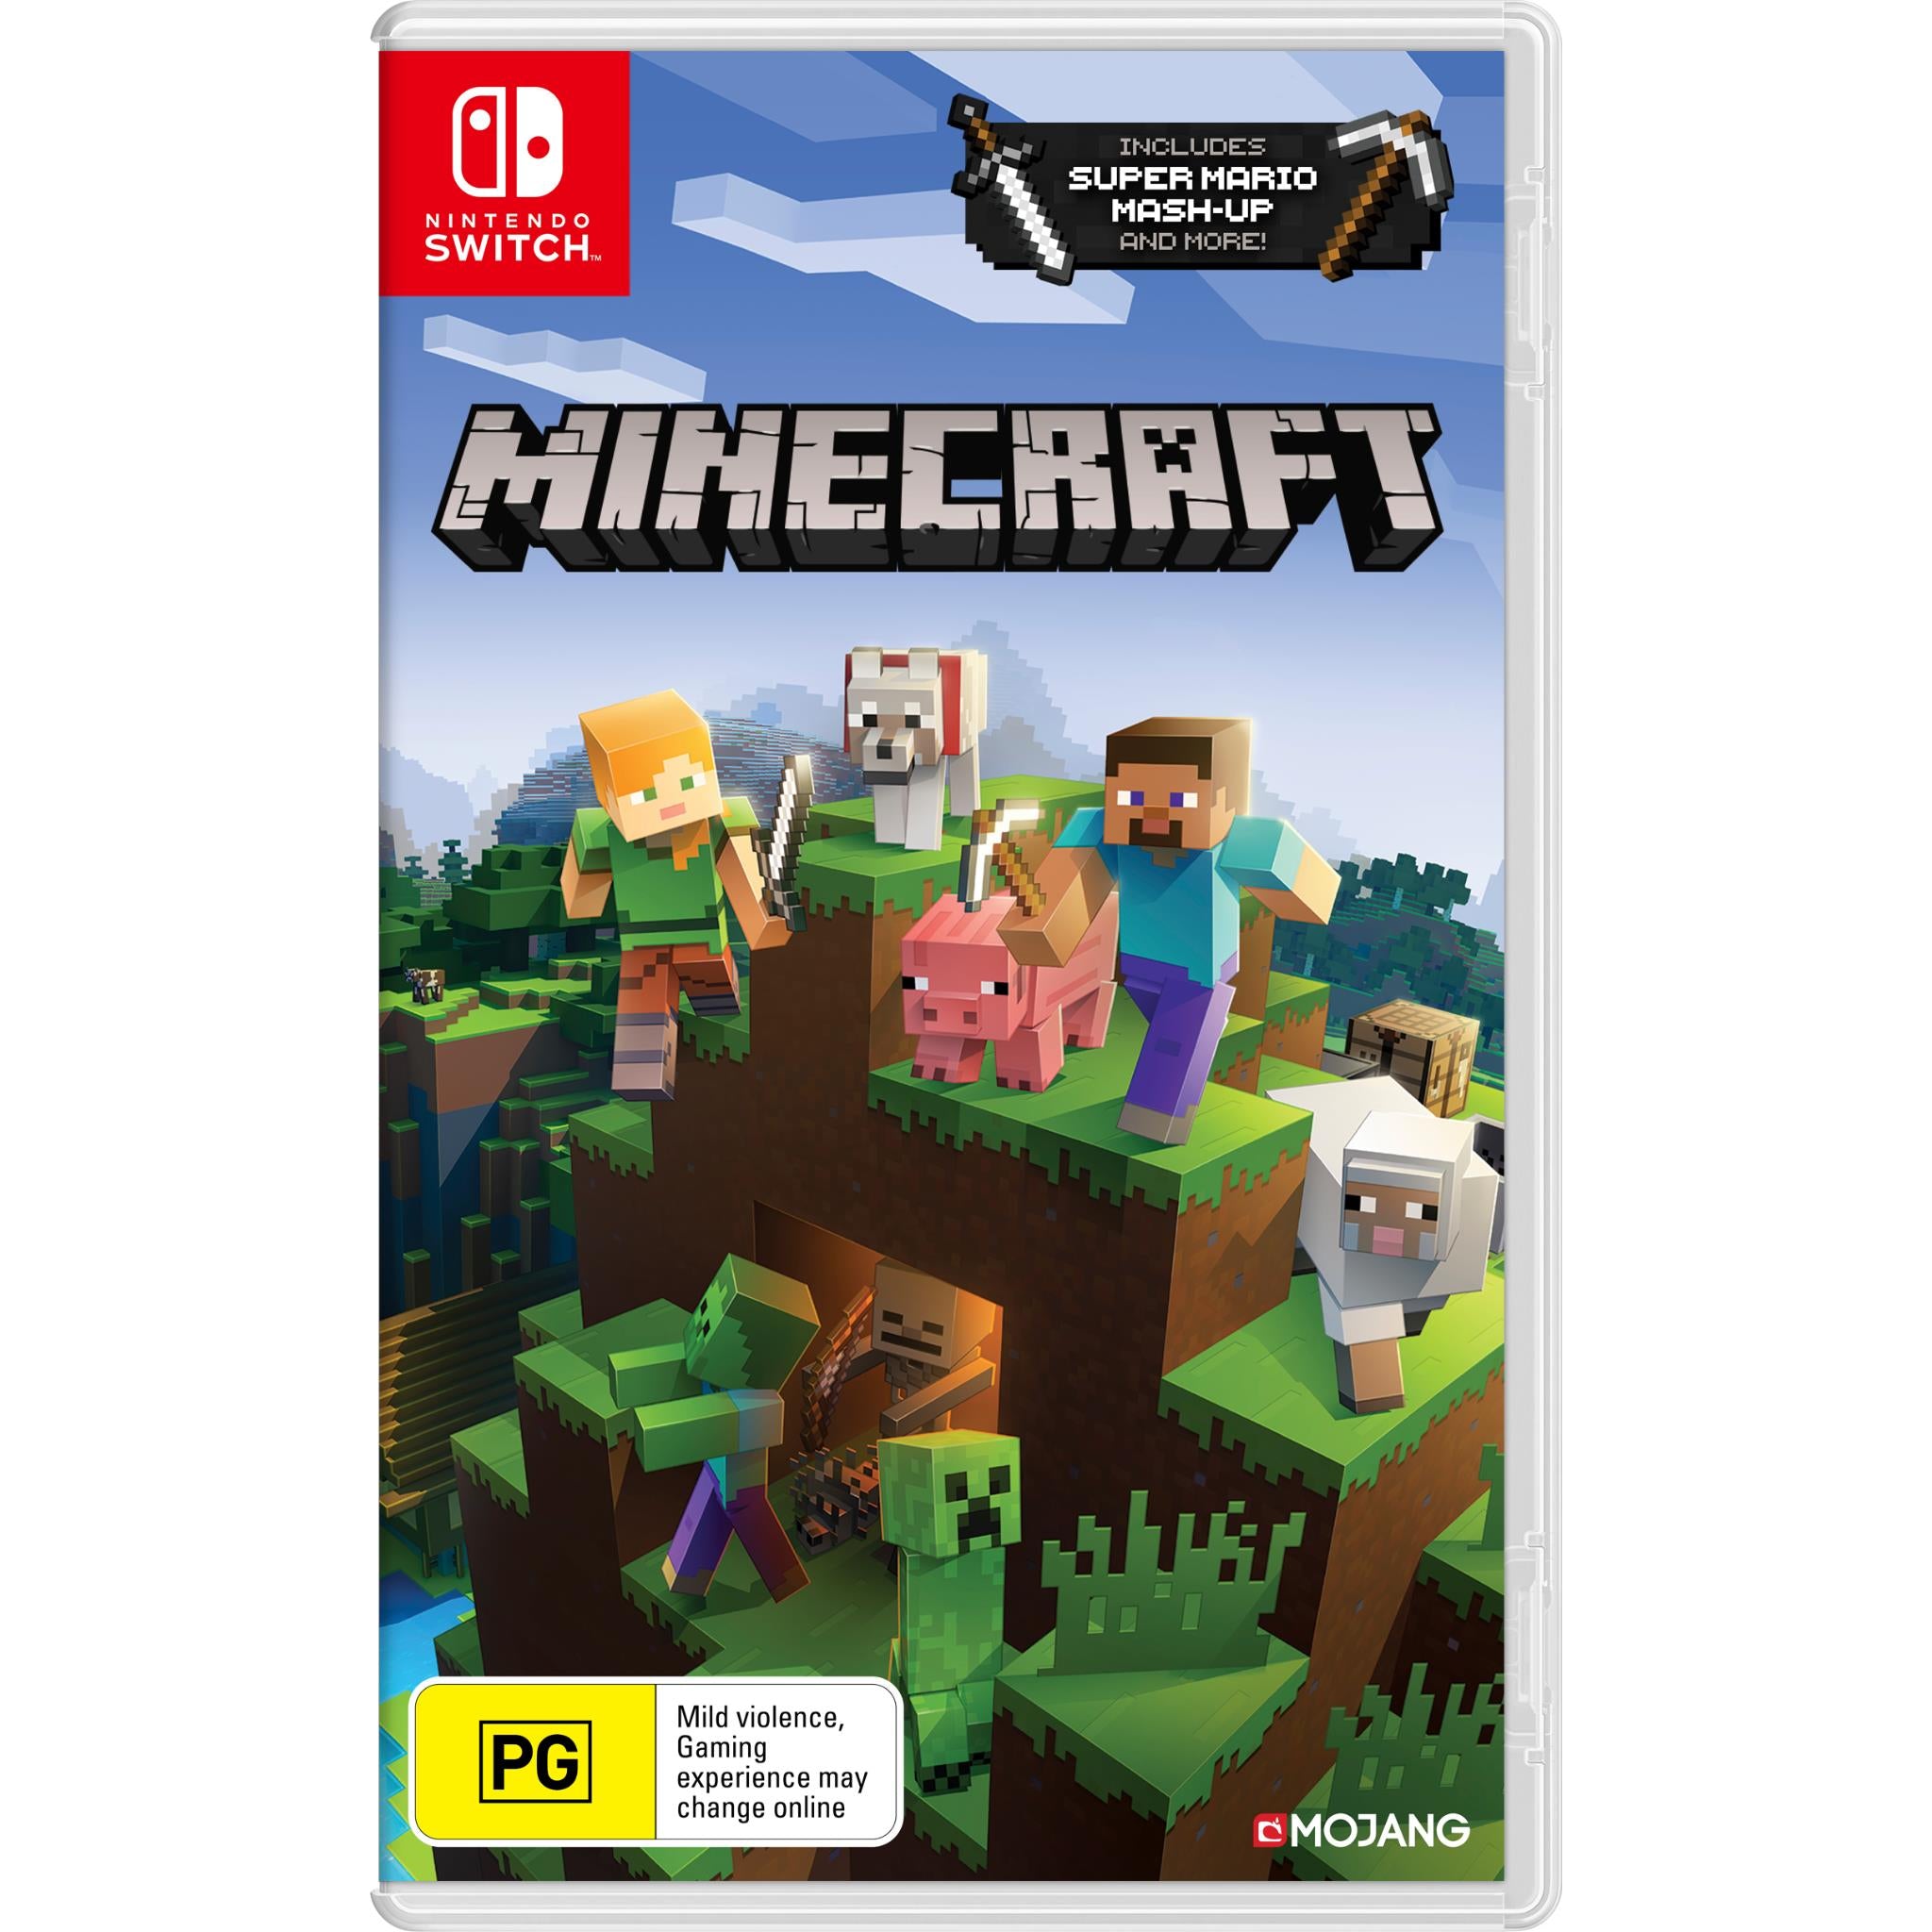 Shop for your Minecraft adventure at EB Games - EB Games Australia